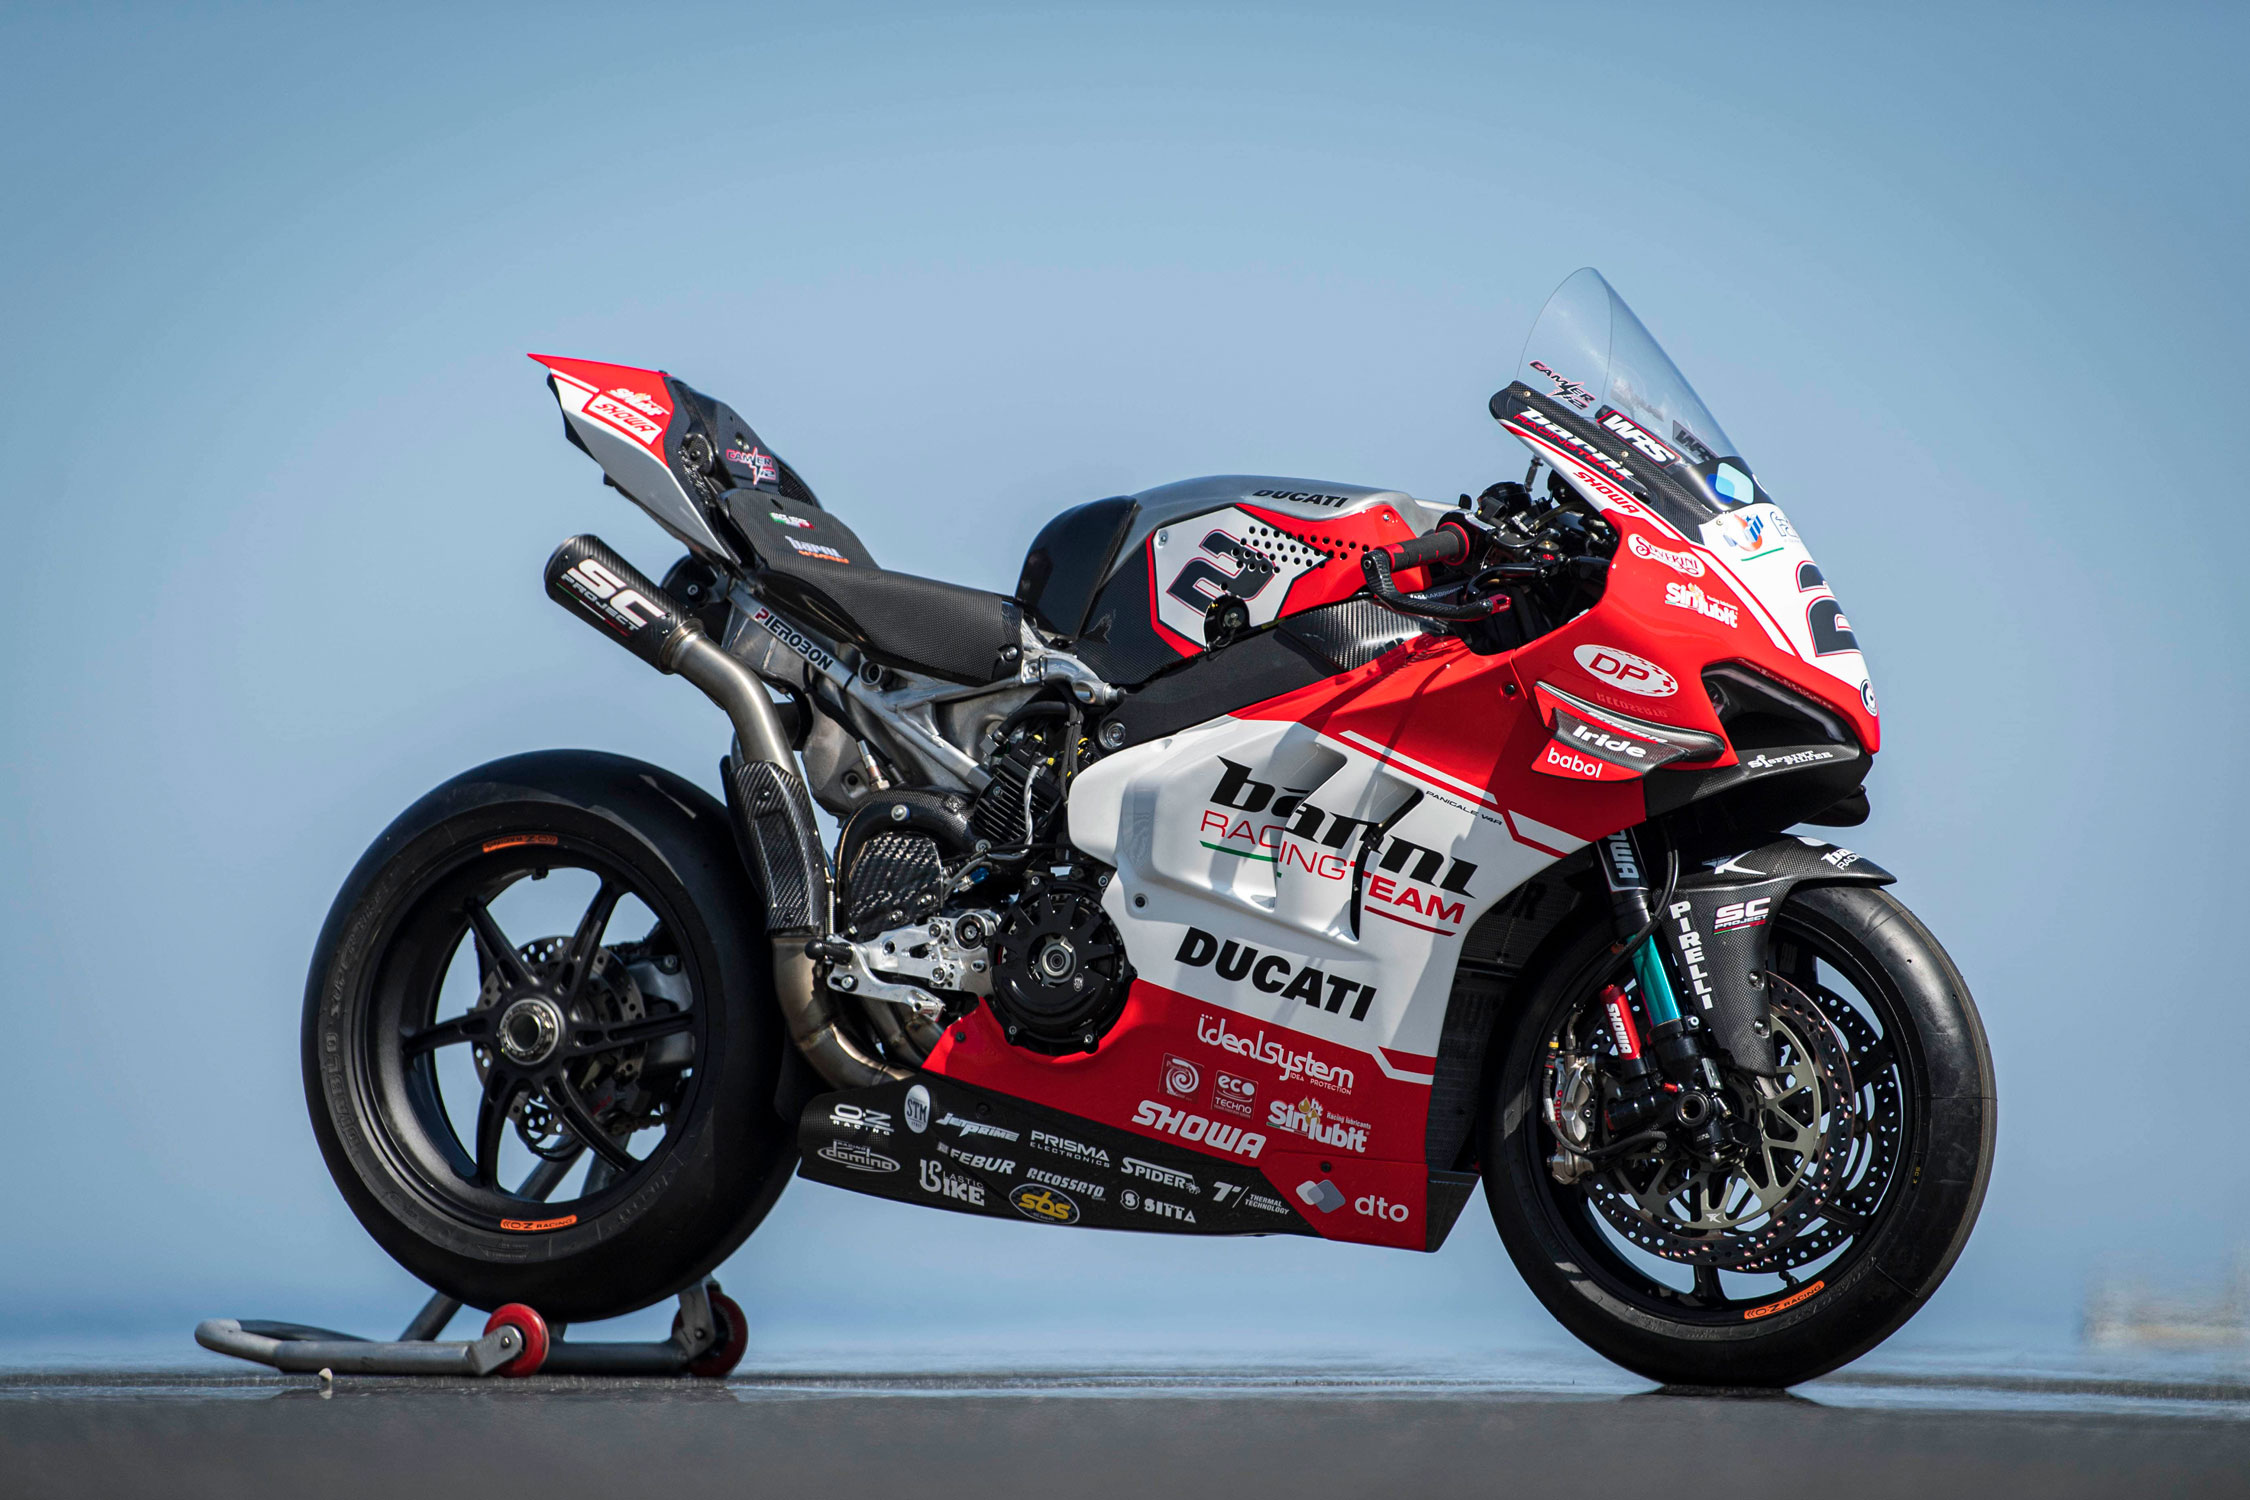 Barni Racing Team And SC-Project Together For The WORLDSBK 2020 Season